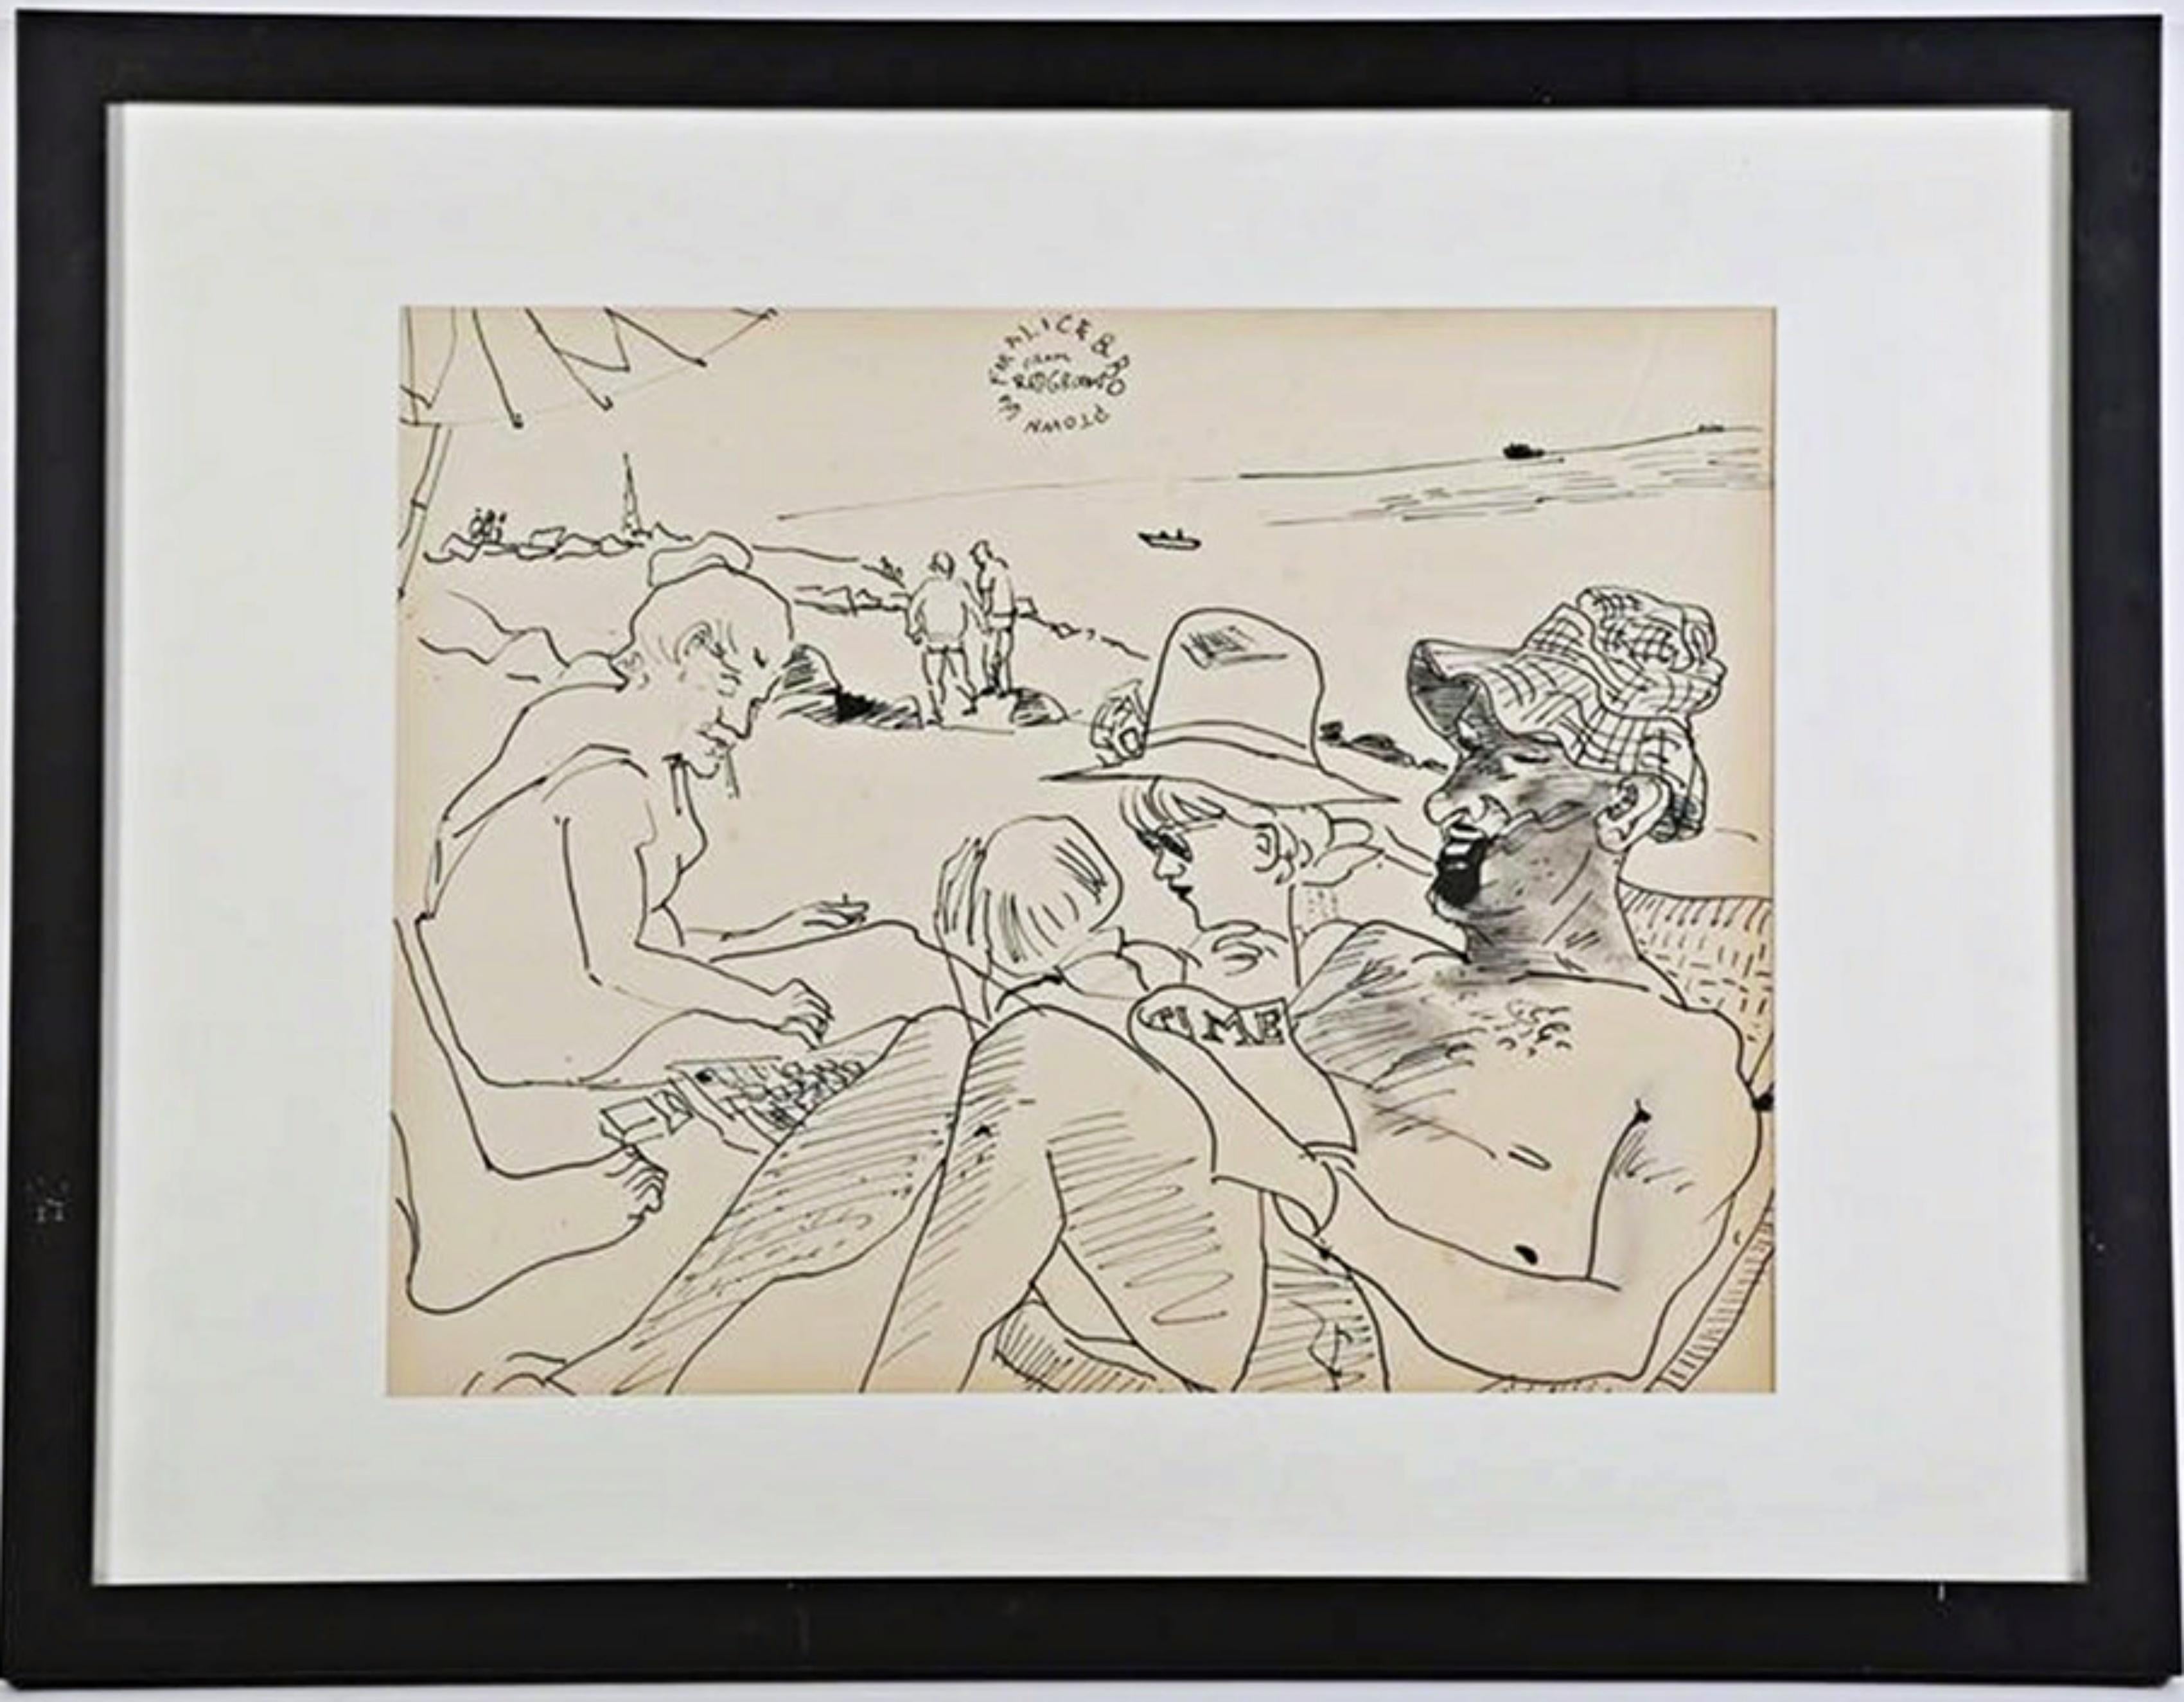 RED GROOMS
(Untitled), for Alice + Bo, Provincetown 1966
Original ink drawing on paper
Signed, inscribed and dated with a dateline of Provincetown on recto.
Vintage frame included
This unique early (1966) framed Red Gooms ink drawing on paper is